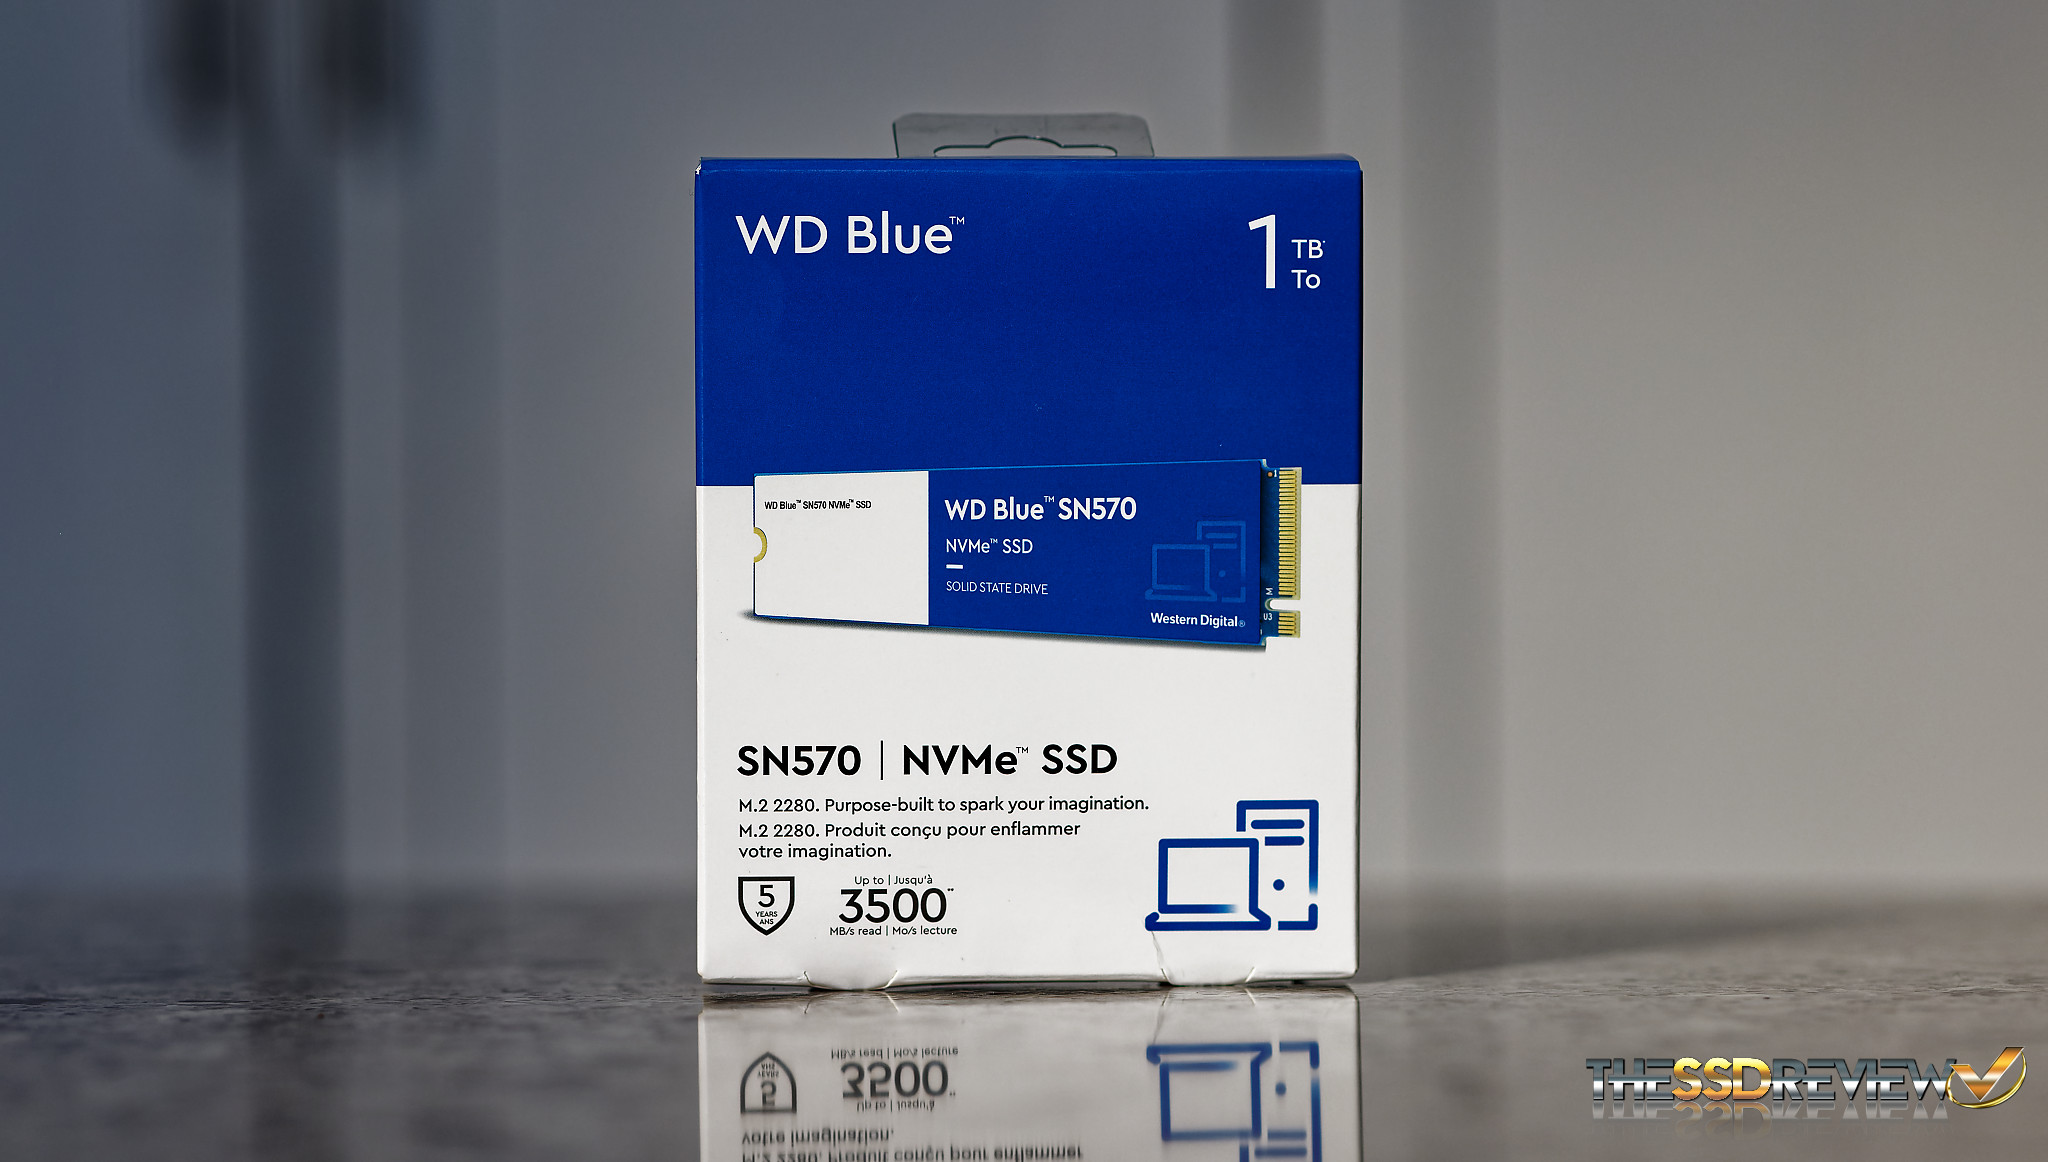 WD Blue SN570 Gen3 NVMe SSD Review - Performance and Value in a